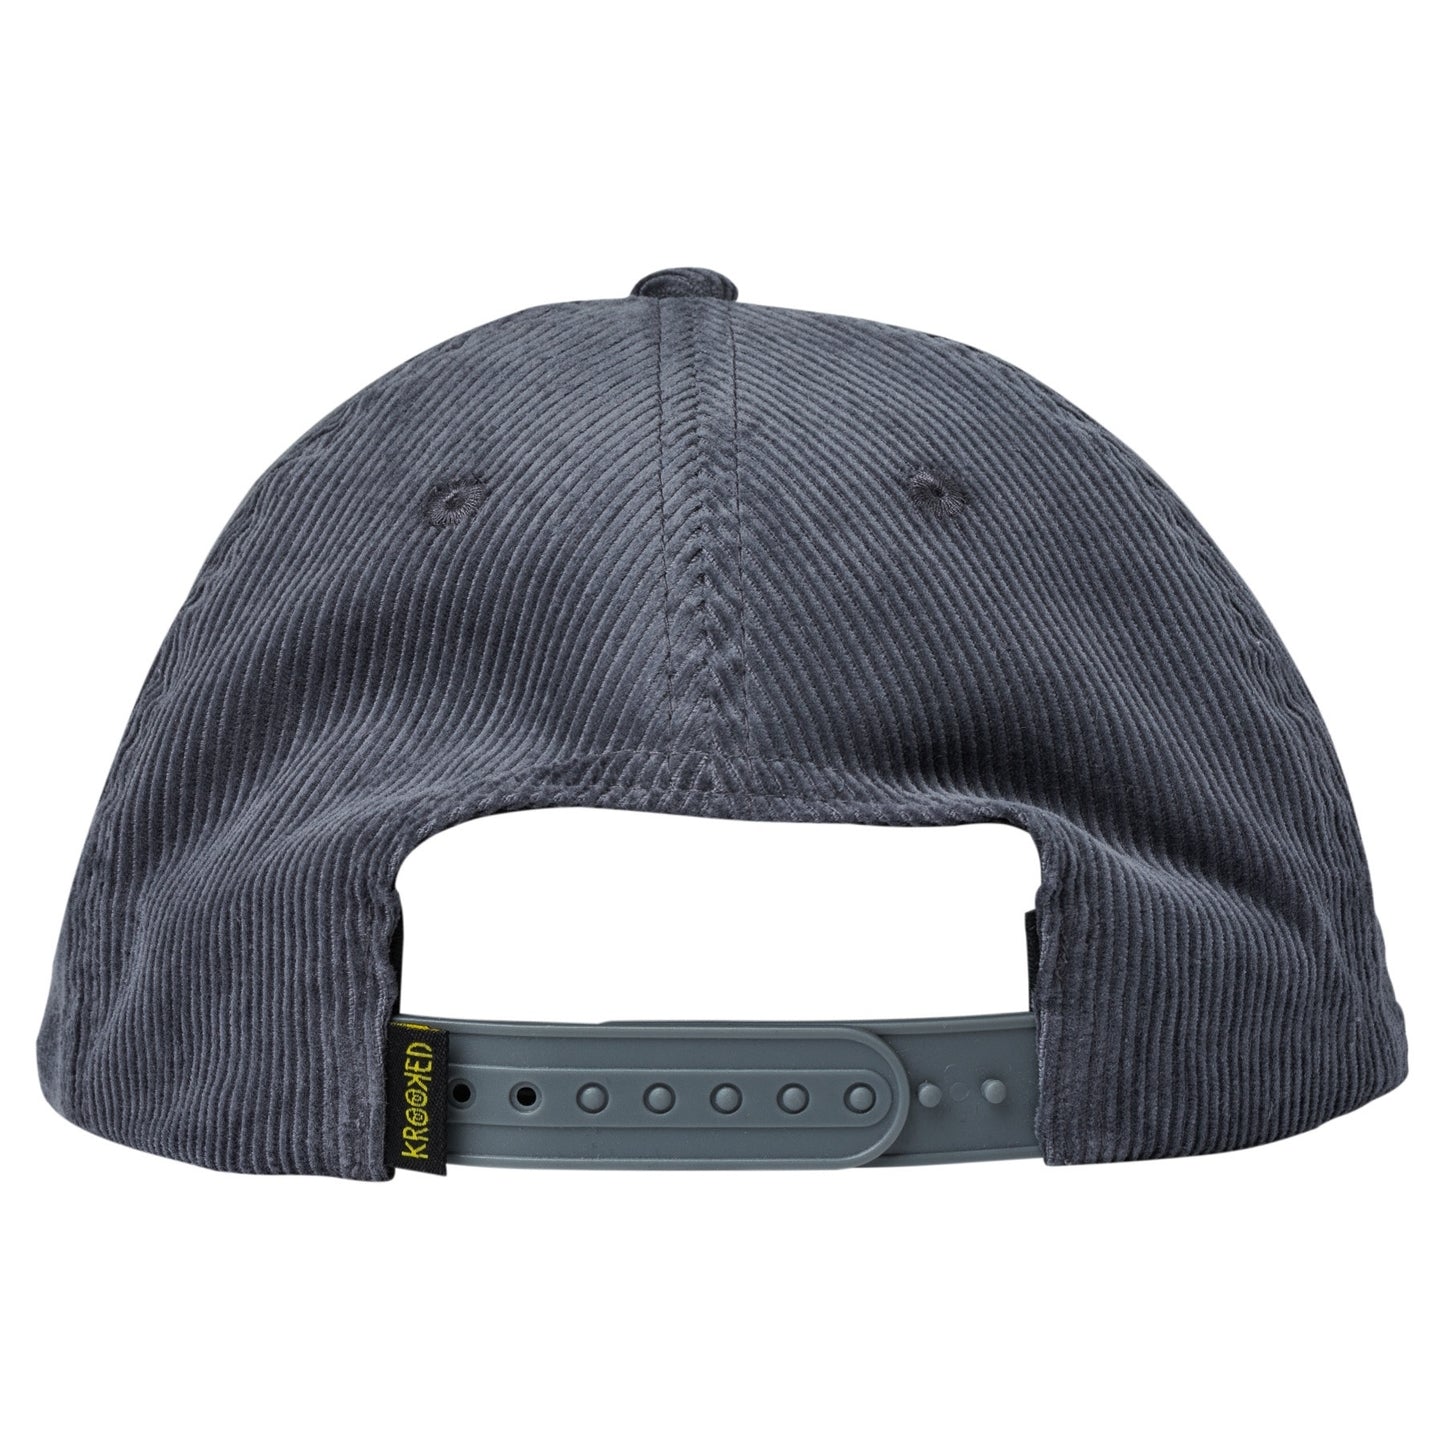 Krooked Style KR Snapback Charcoal